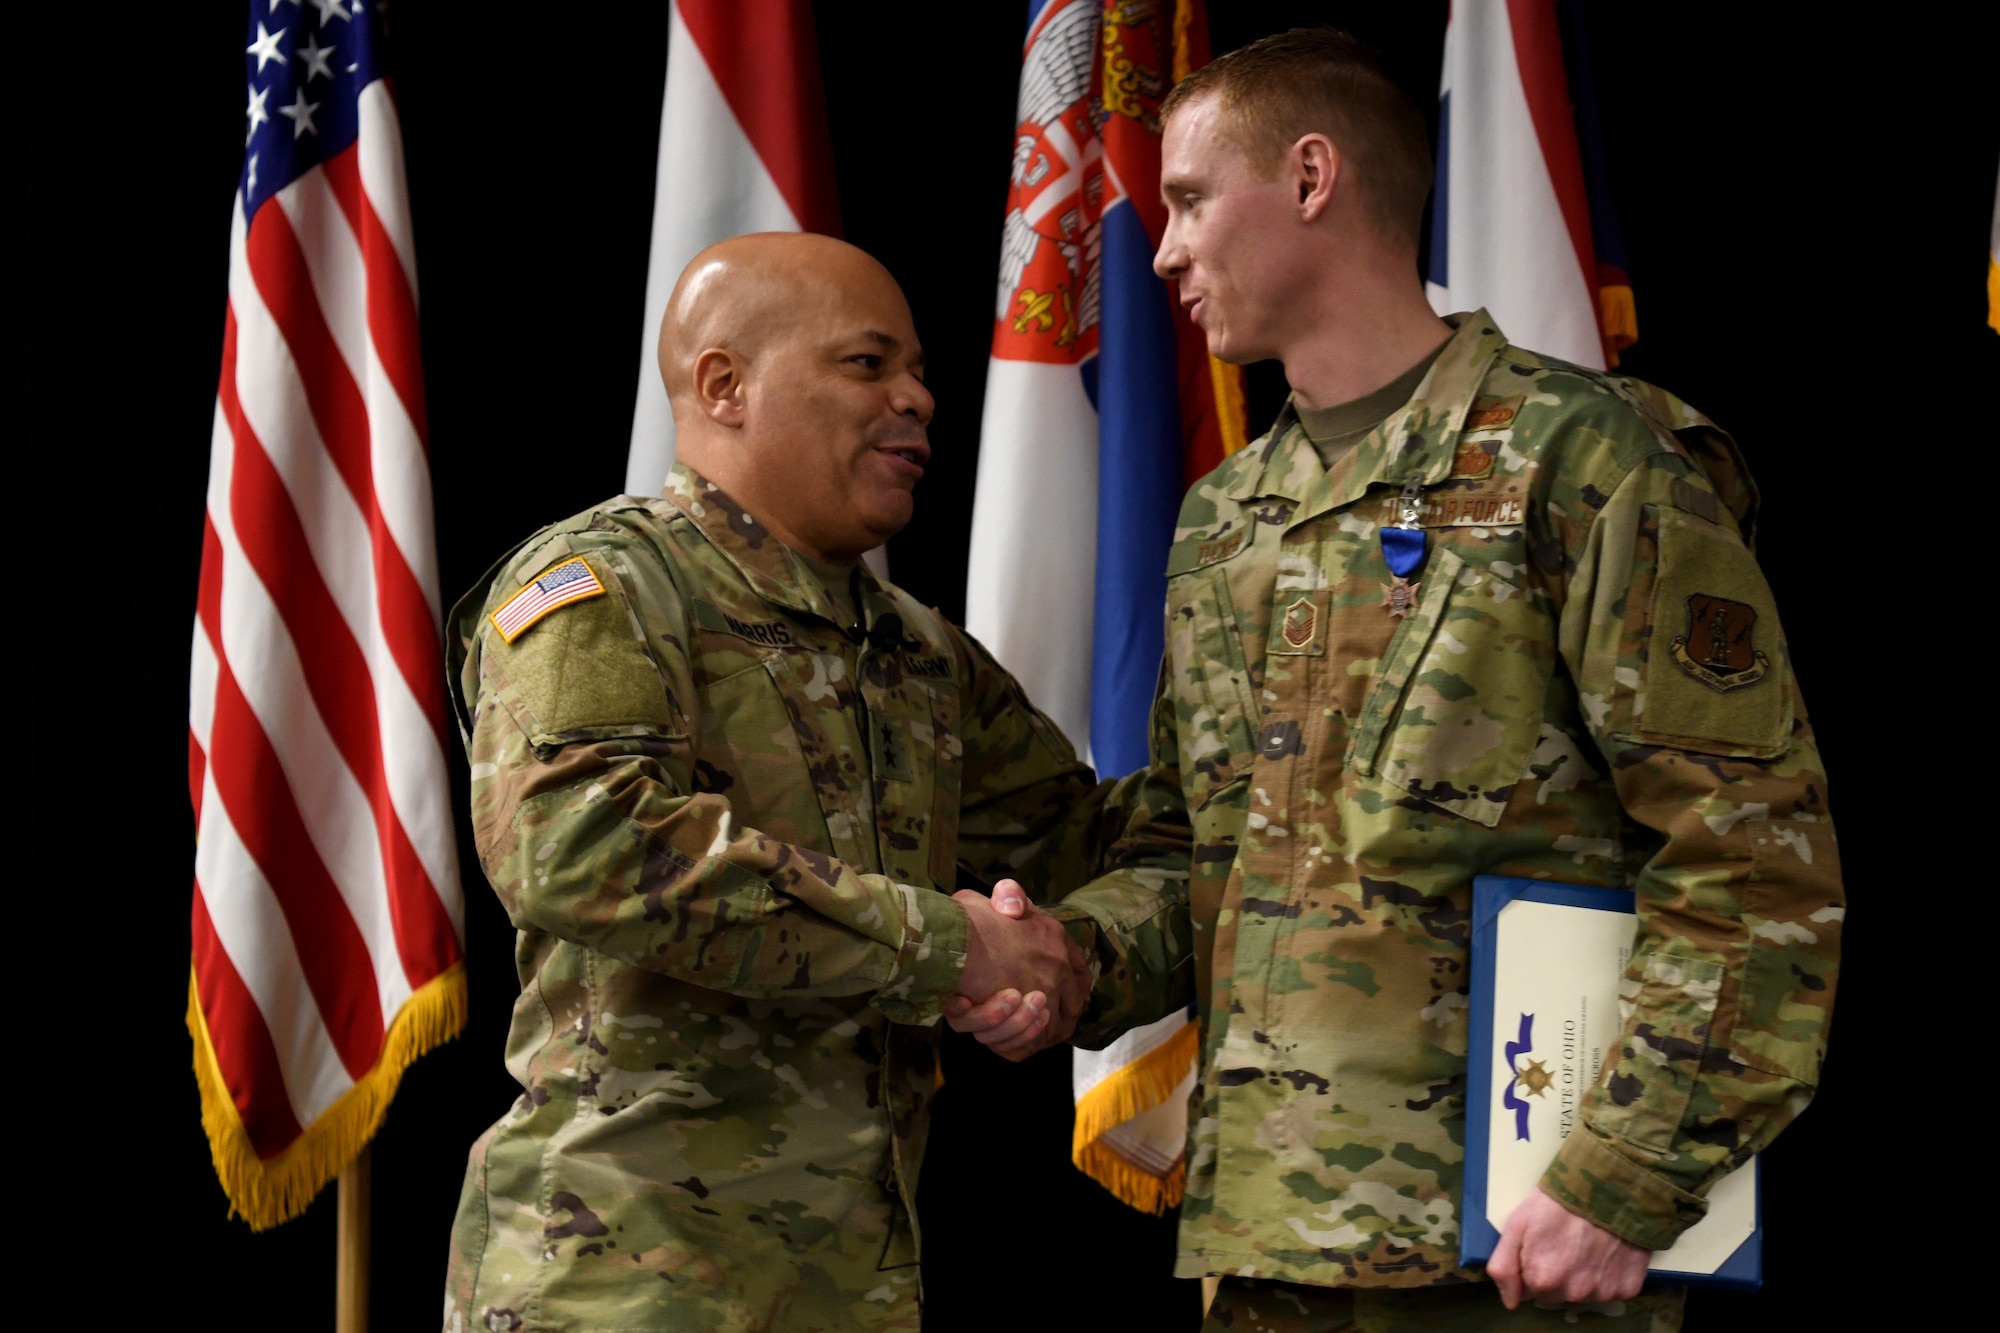 U.S. Army Maj. General John C. Harris, the Ohio Adjutant General, congratulates U.S. Air Force Master Sgt. Ryan Tucker after Ohio’s Lt. Governor Jon Husted awarded Tucker the Ohio Cross during a ceremony at the Ohio National Guard’s Joint Senior Leaders Conference Feb. 14, 2020 in Columbus, Ohio. The Ohio Cross is awarded to any member of the state military forces who distinguishes themselves by gallantry and intrepidity at the risk of their life. (U.S. Air Force photo by Tech. Sgt. Shane Hughes)